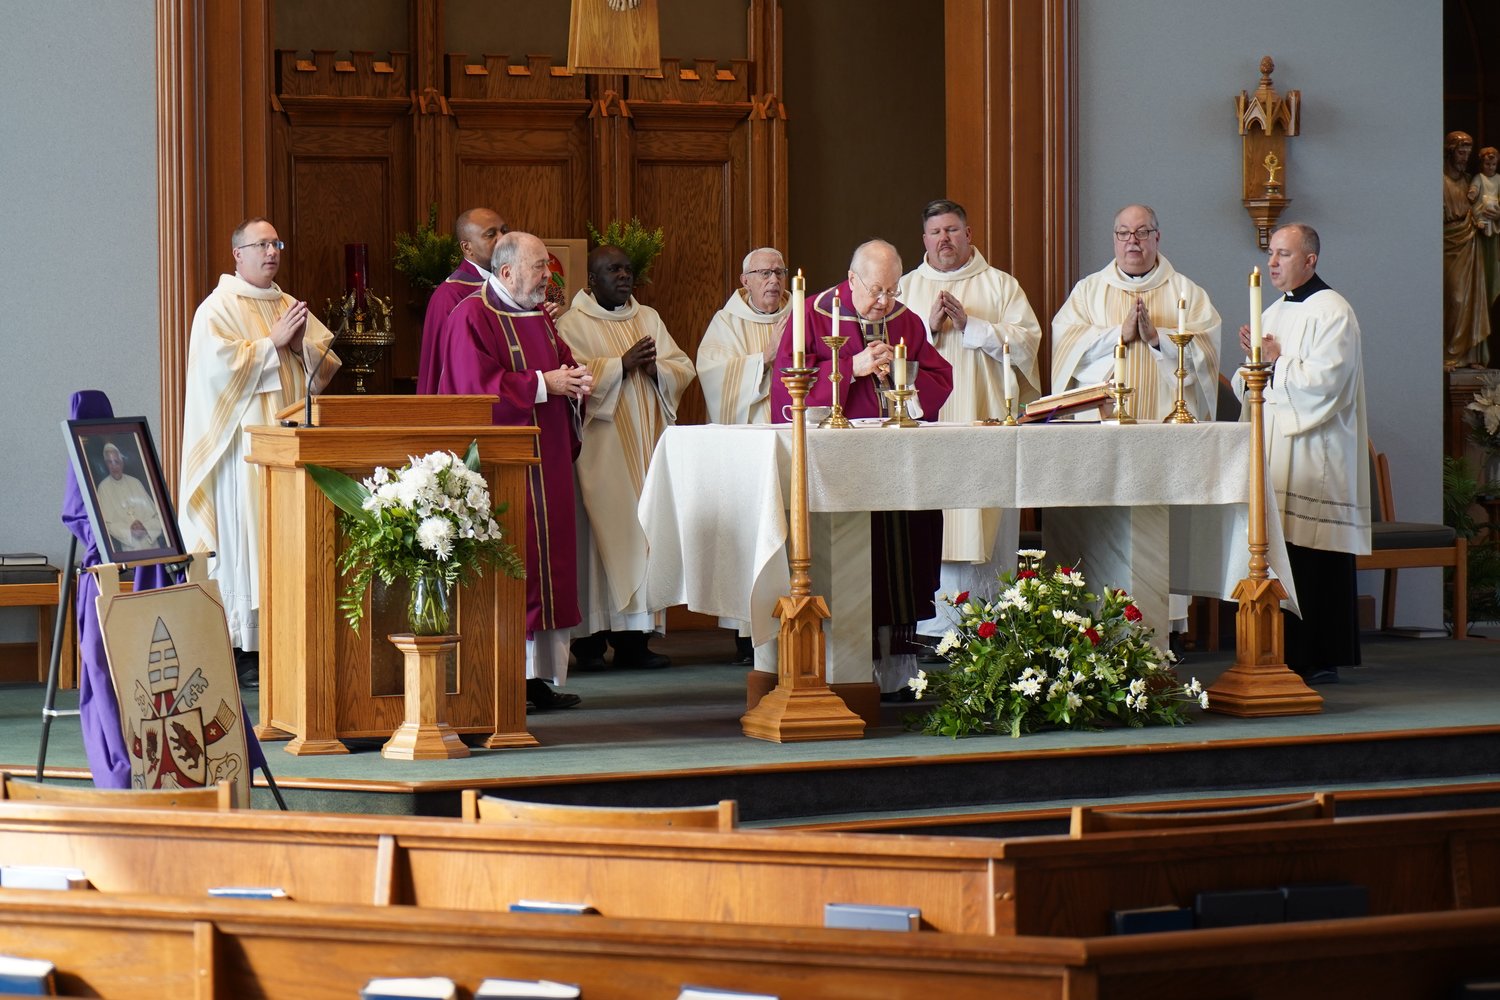 Bishop Emeritus John R. Gaydos, who led the Jefferson City diocese from 1997 to 2018, elevates the Most Blessed Sacrament (right) during the See City Deanery’s Memorial Mass for Pope Emeritus Benedict XVI on Jan. 6 in St. Andrew Church in Holts Summit.